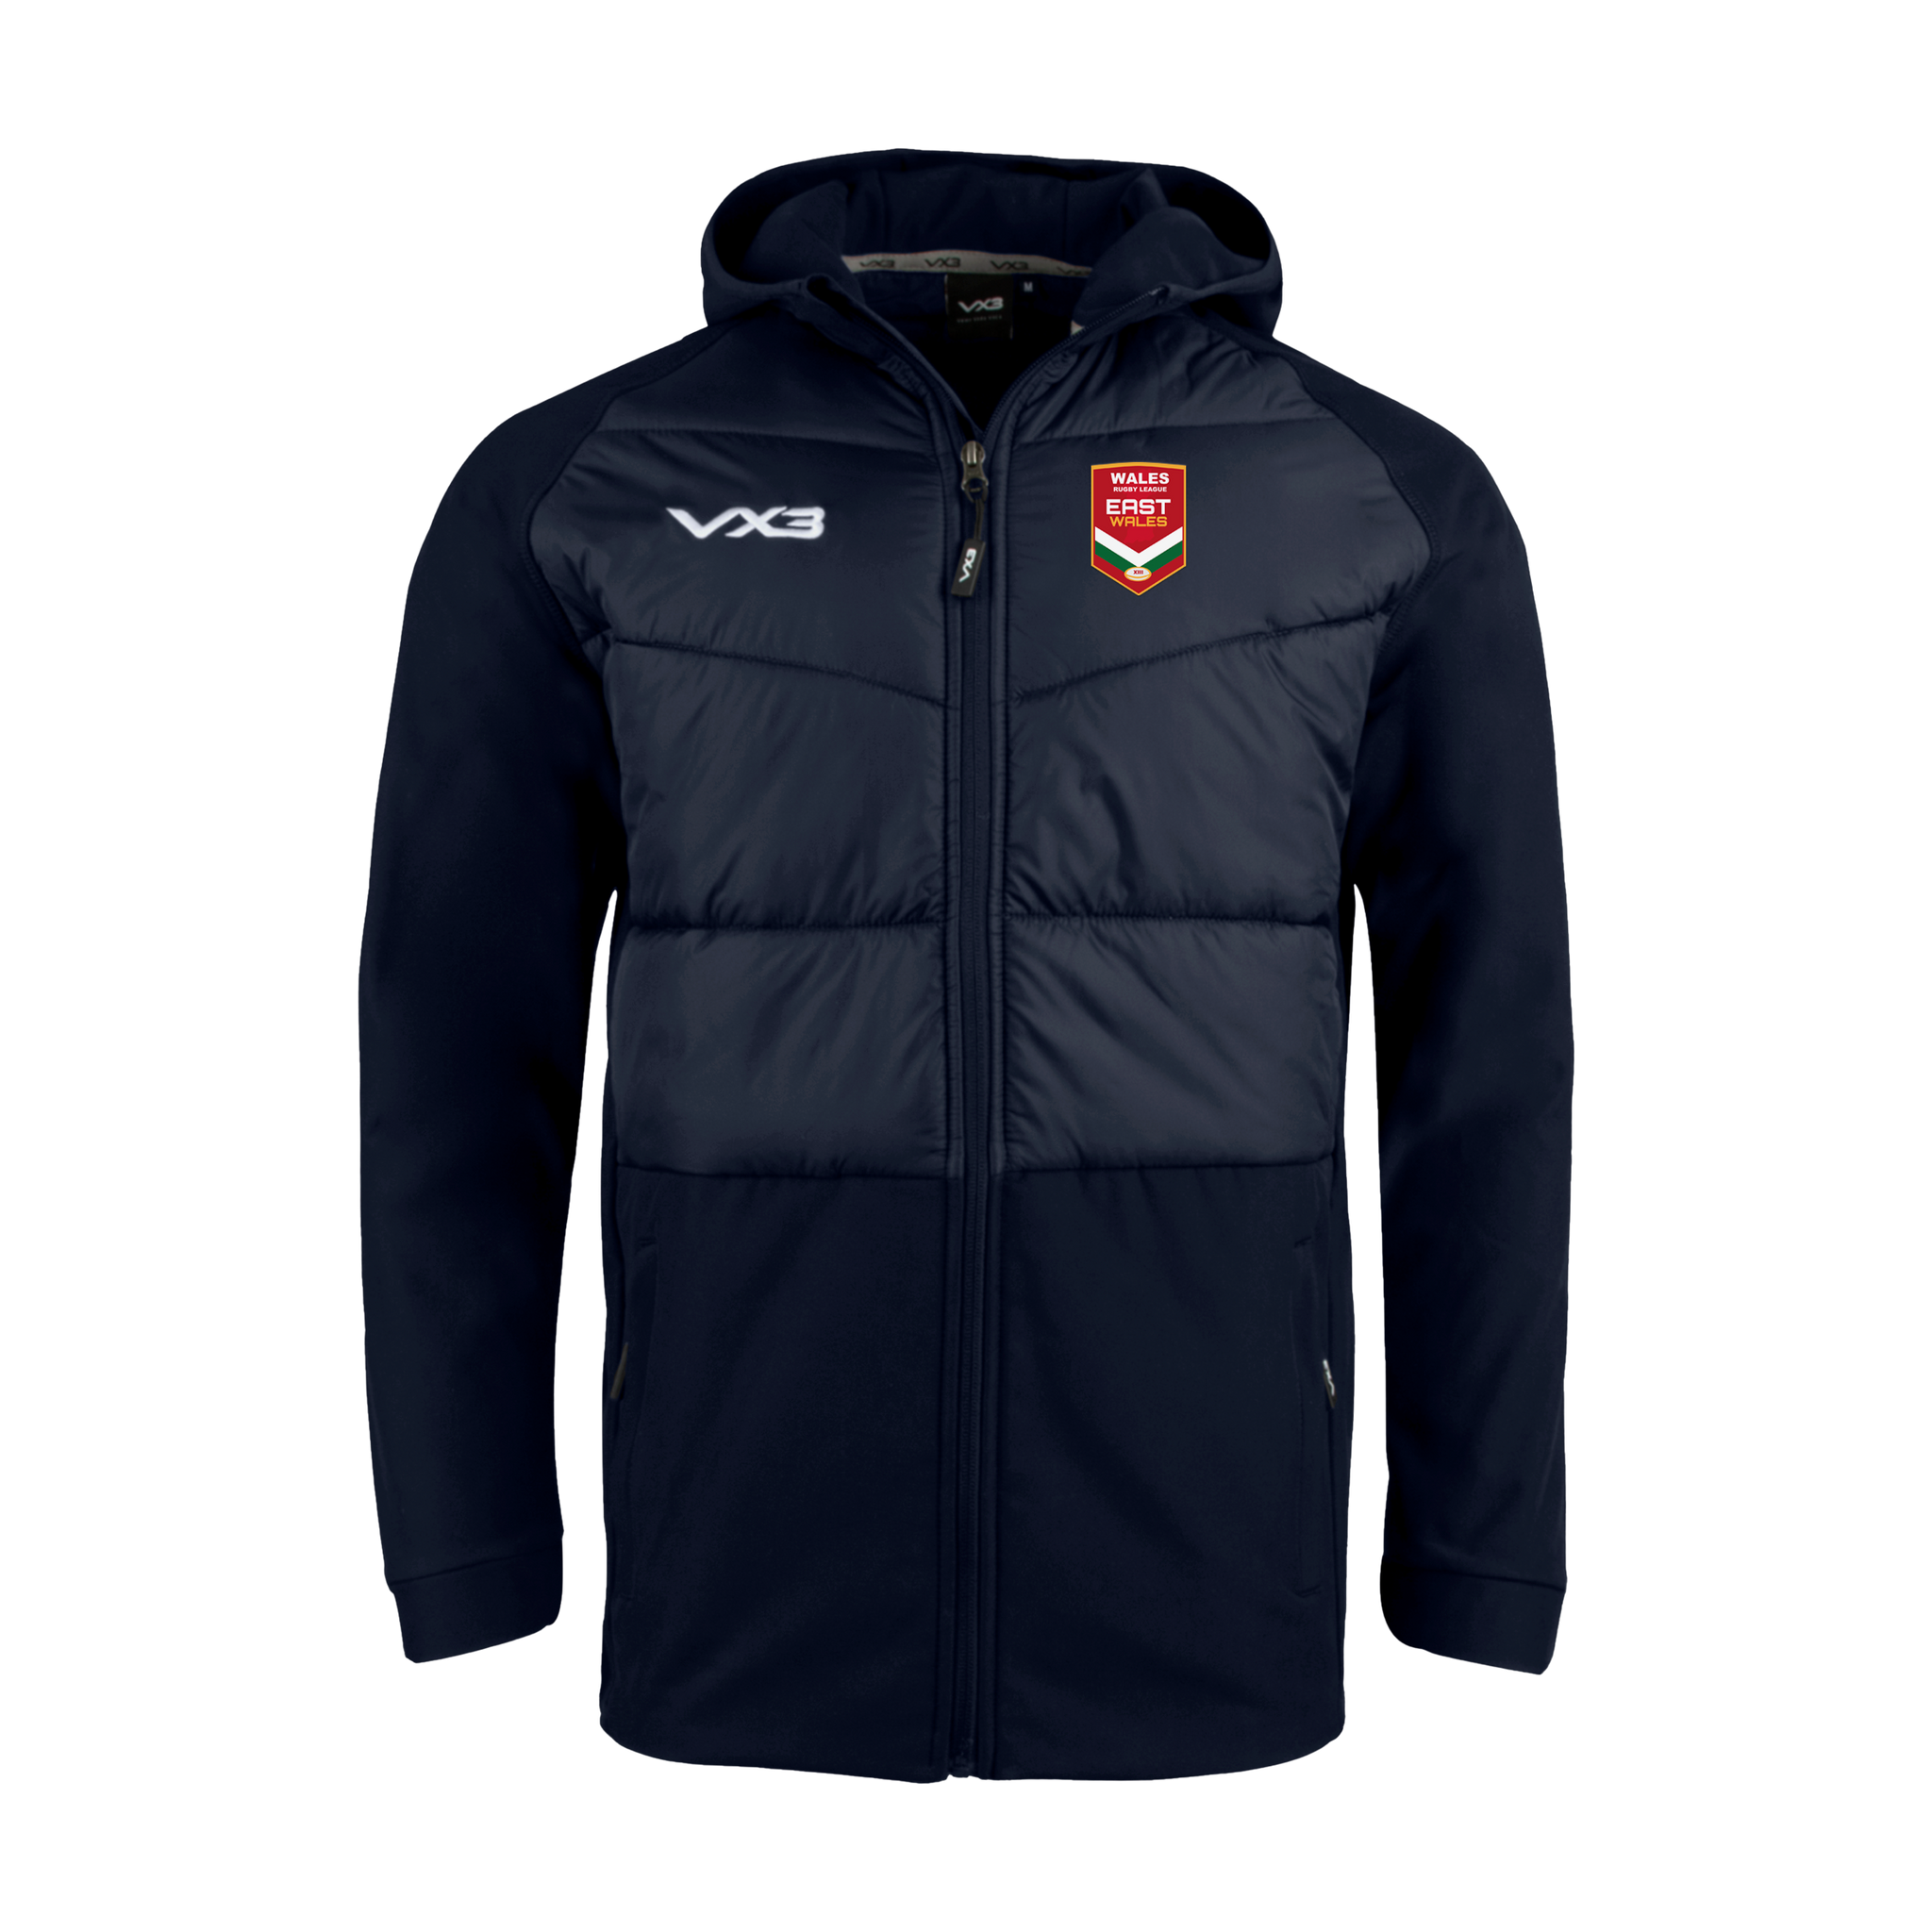 East Wales Rugby League Tempest Hybrid Jacket